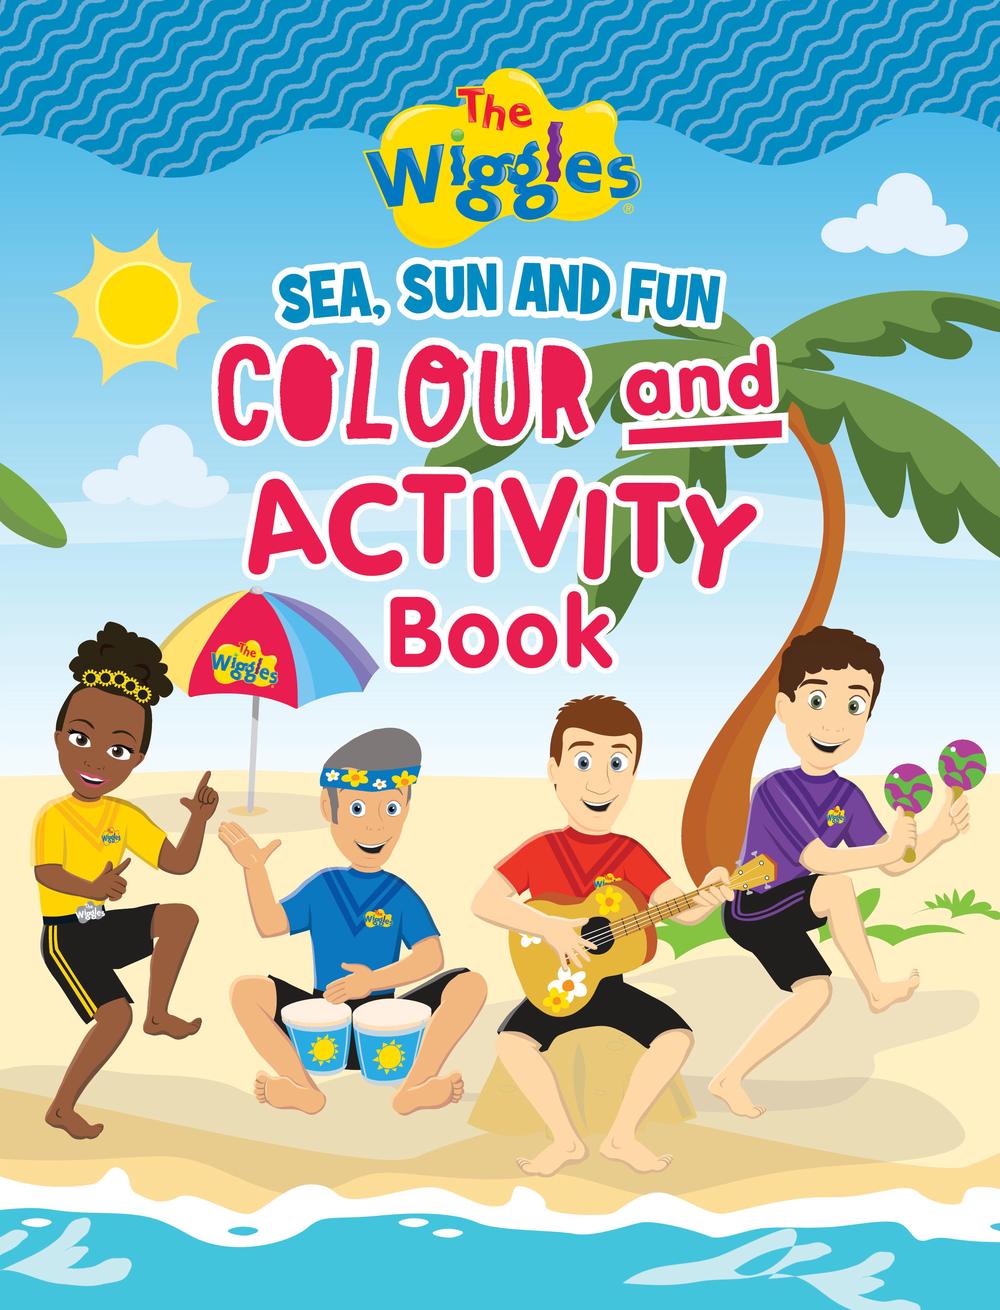 The Wiggles: Sea, Sun and Fun Colour and Activity Book by The Wiggles ...